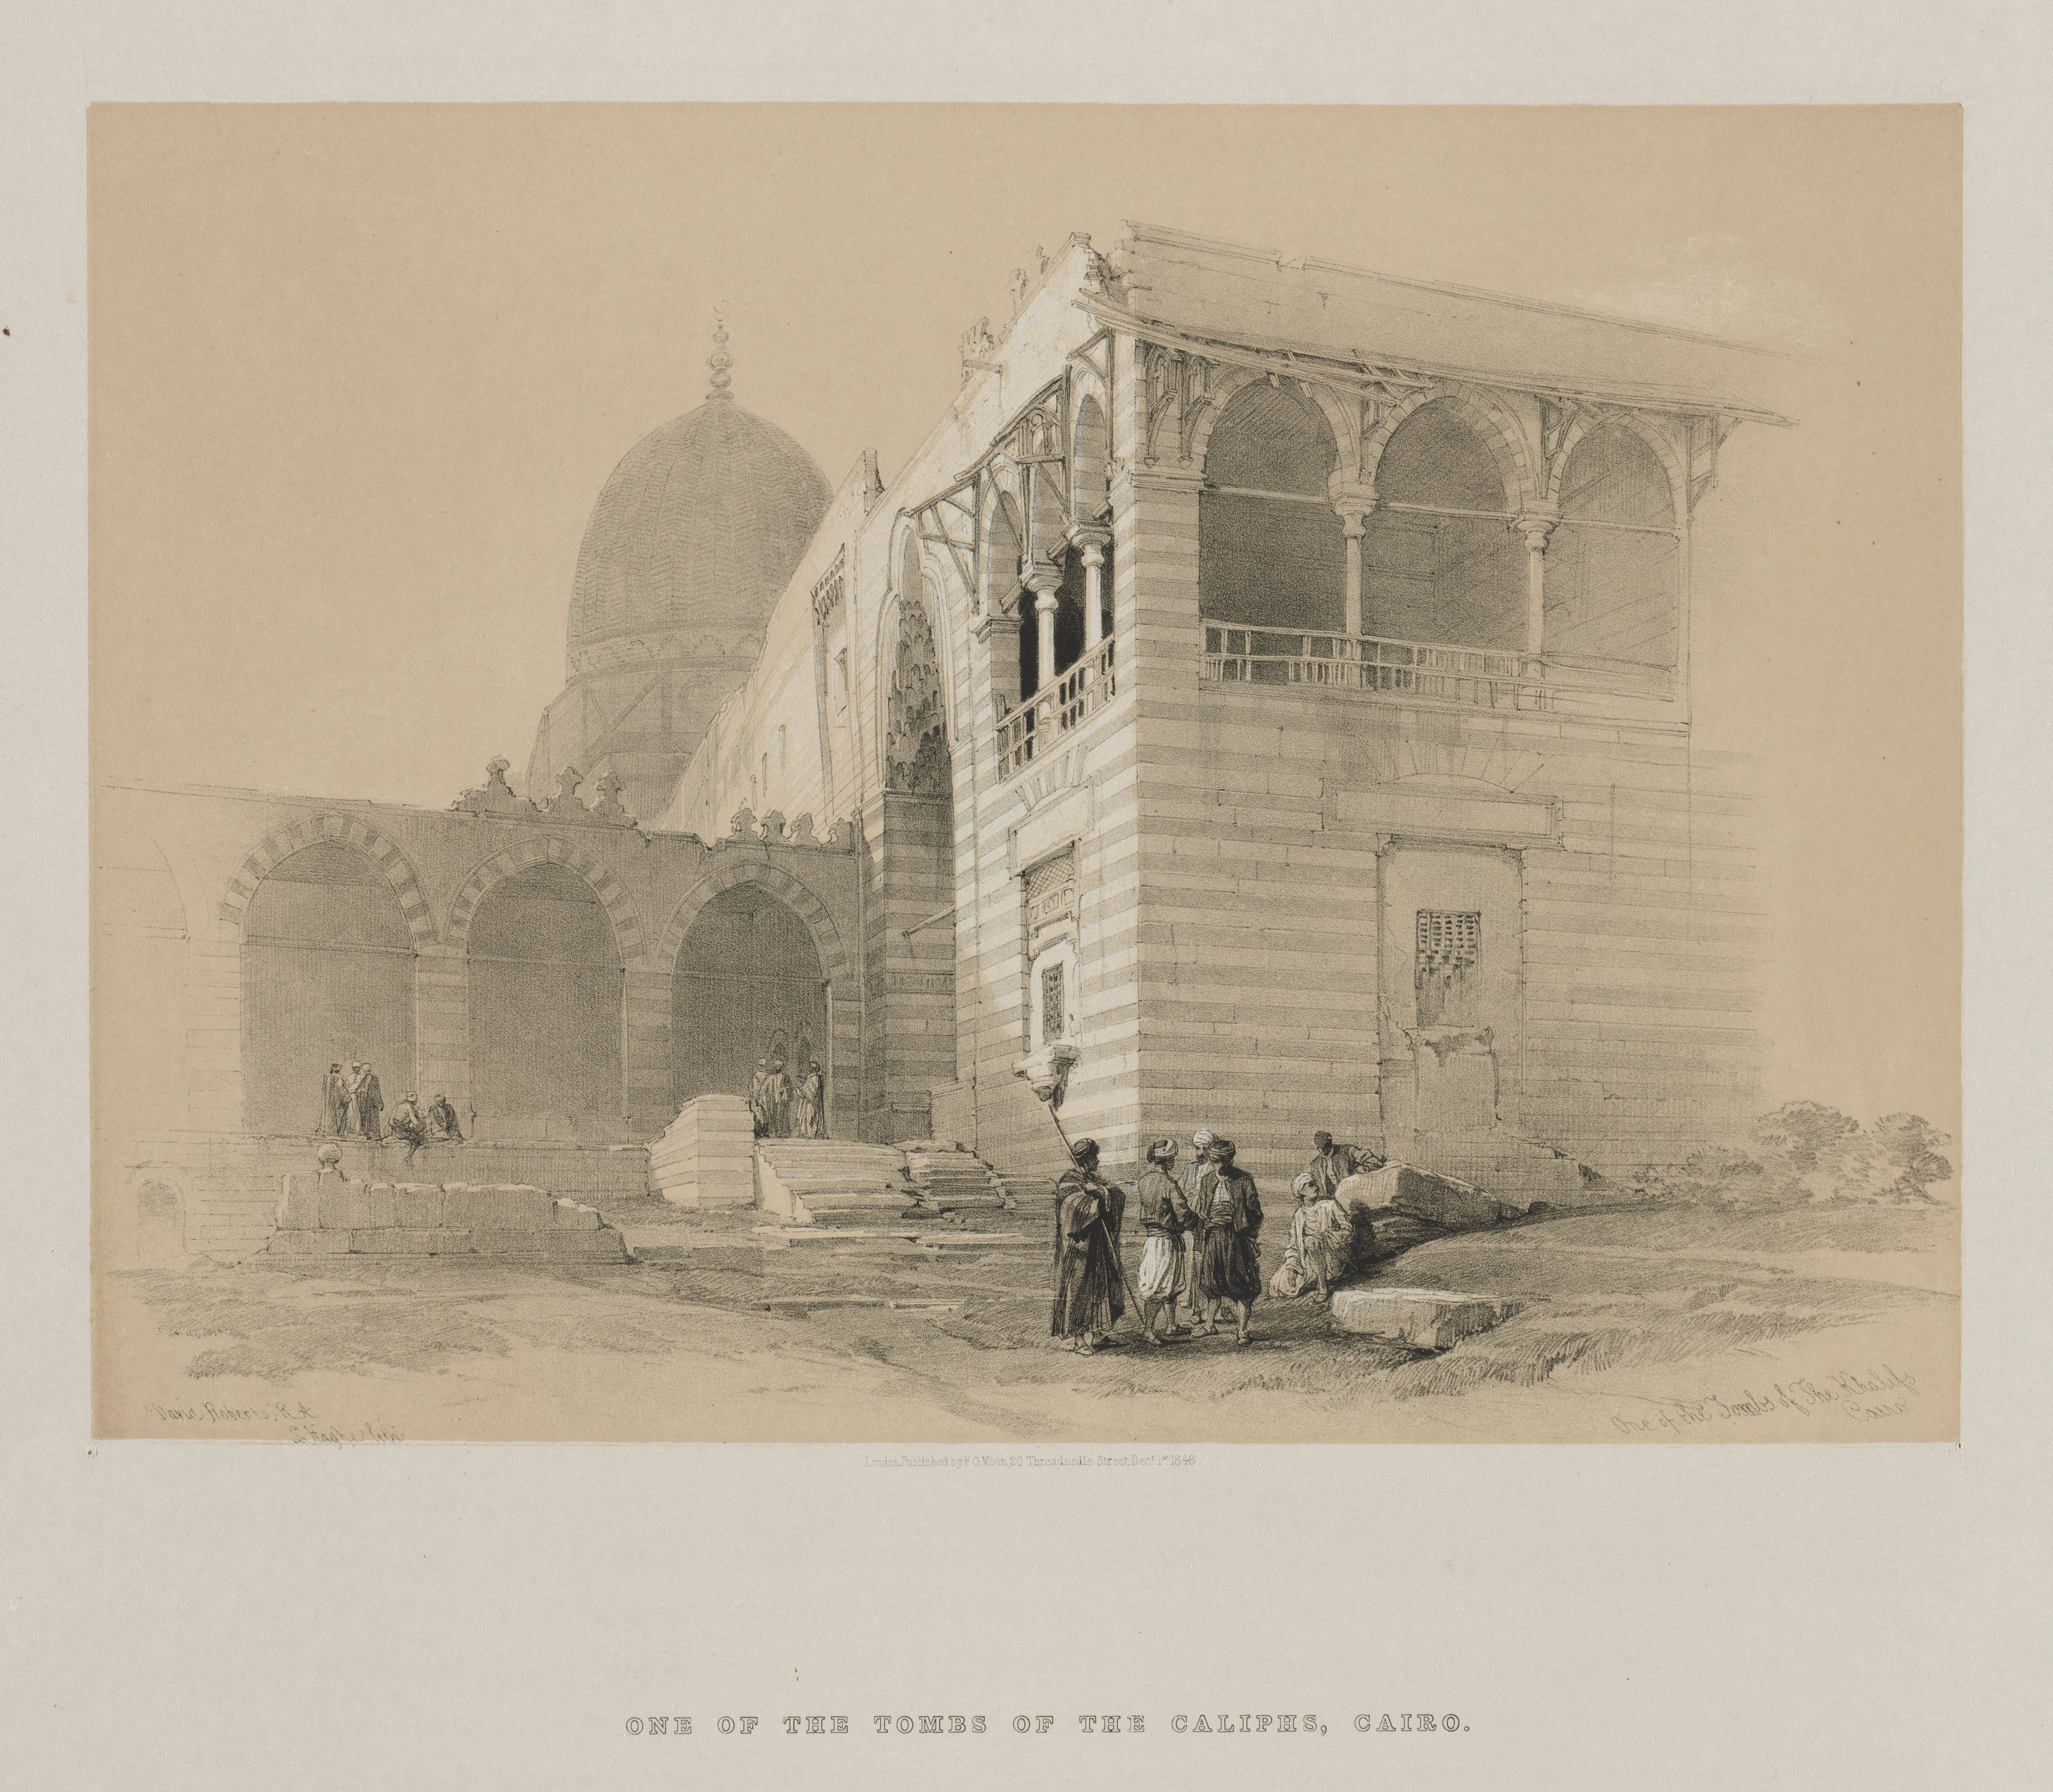 Egypt and Nubia, Volume III: One of the Tombs of the Khalifs, Cairo